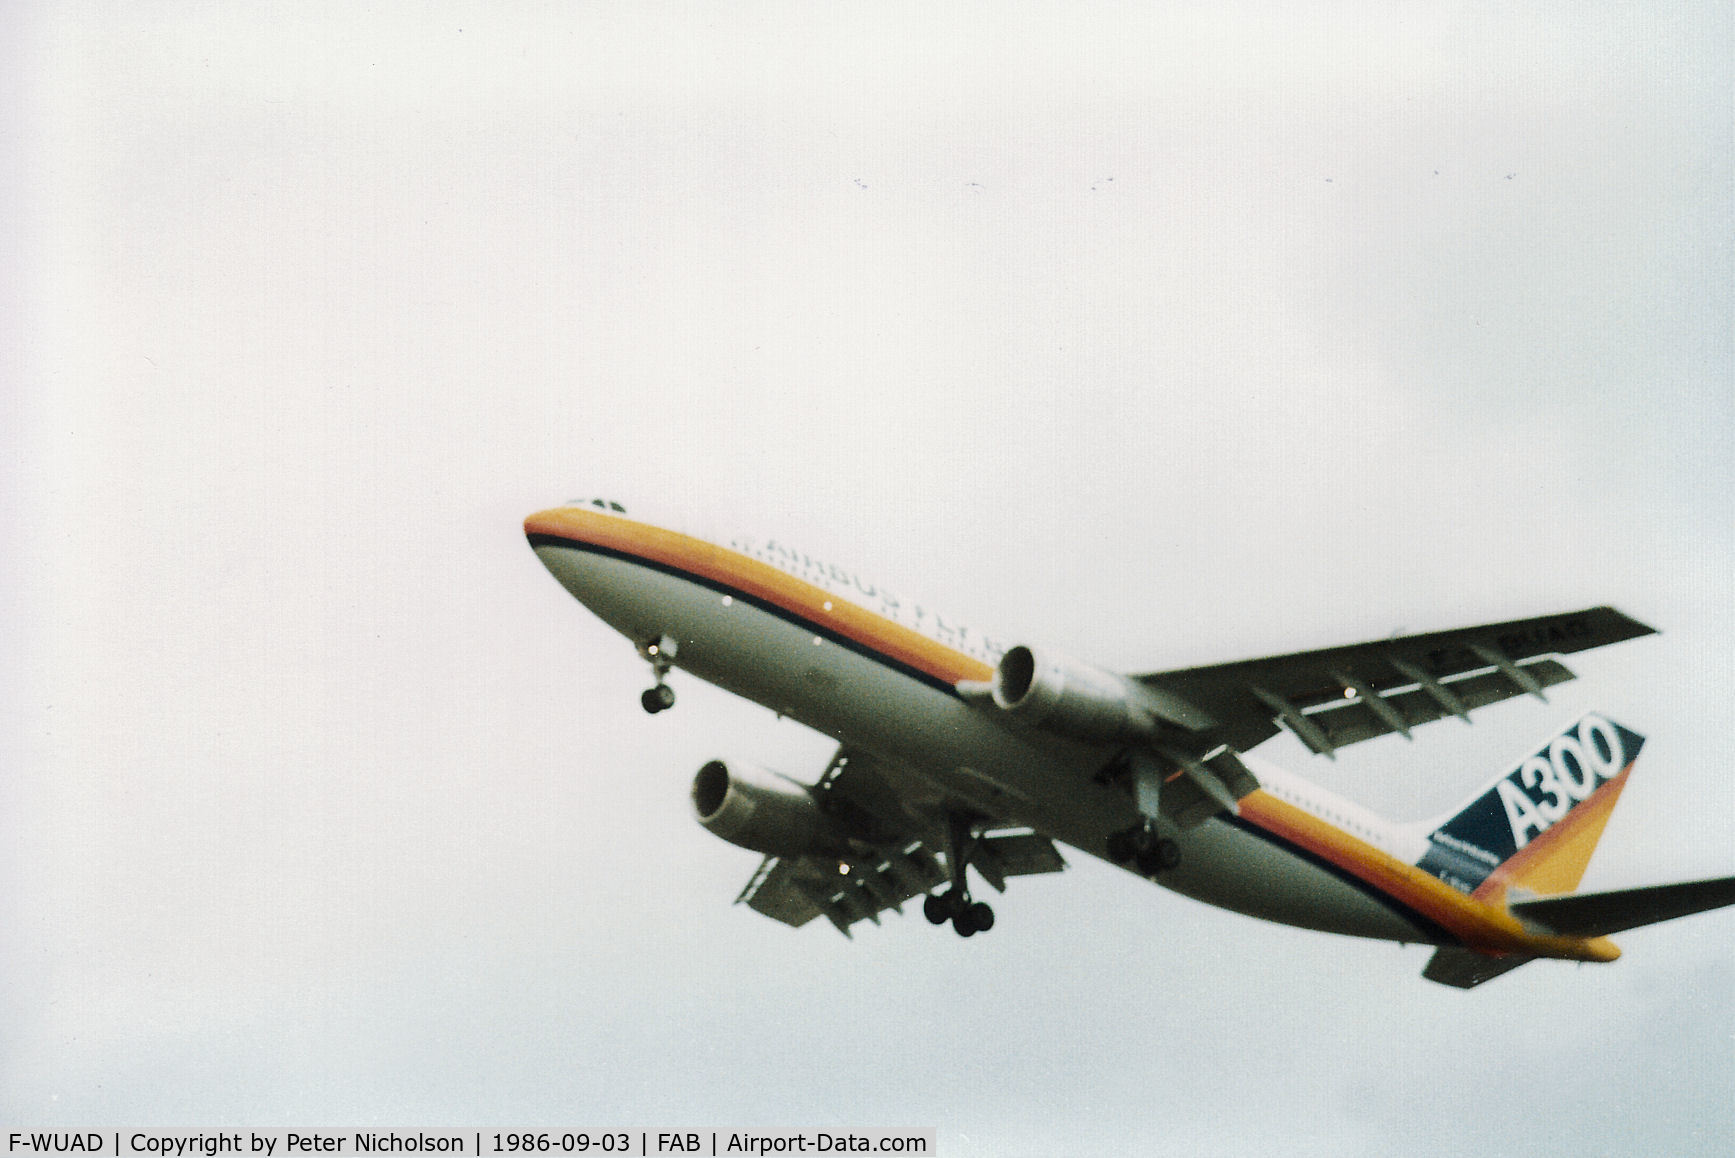 F-WUAD, 1973 Airbus A300B2-103 C/N 003, The Airbus Fly-by-Wire demonstrator was flown at the 1986 Farnborough Airshow.